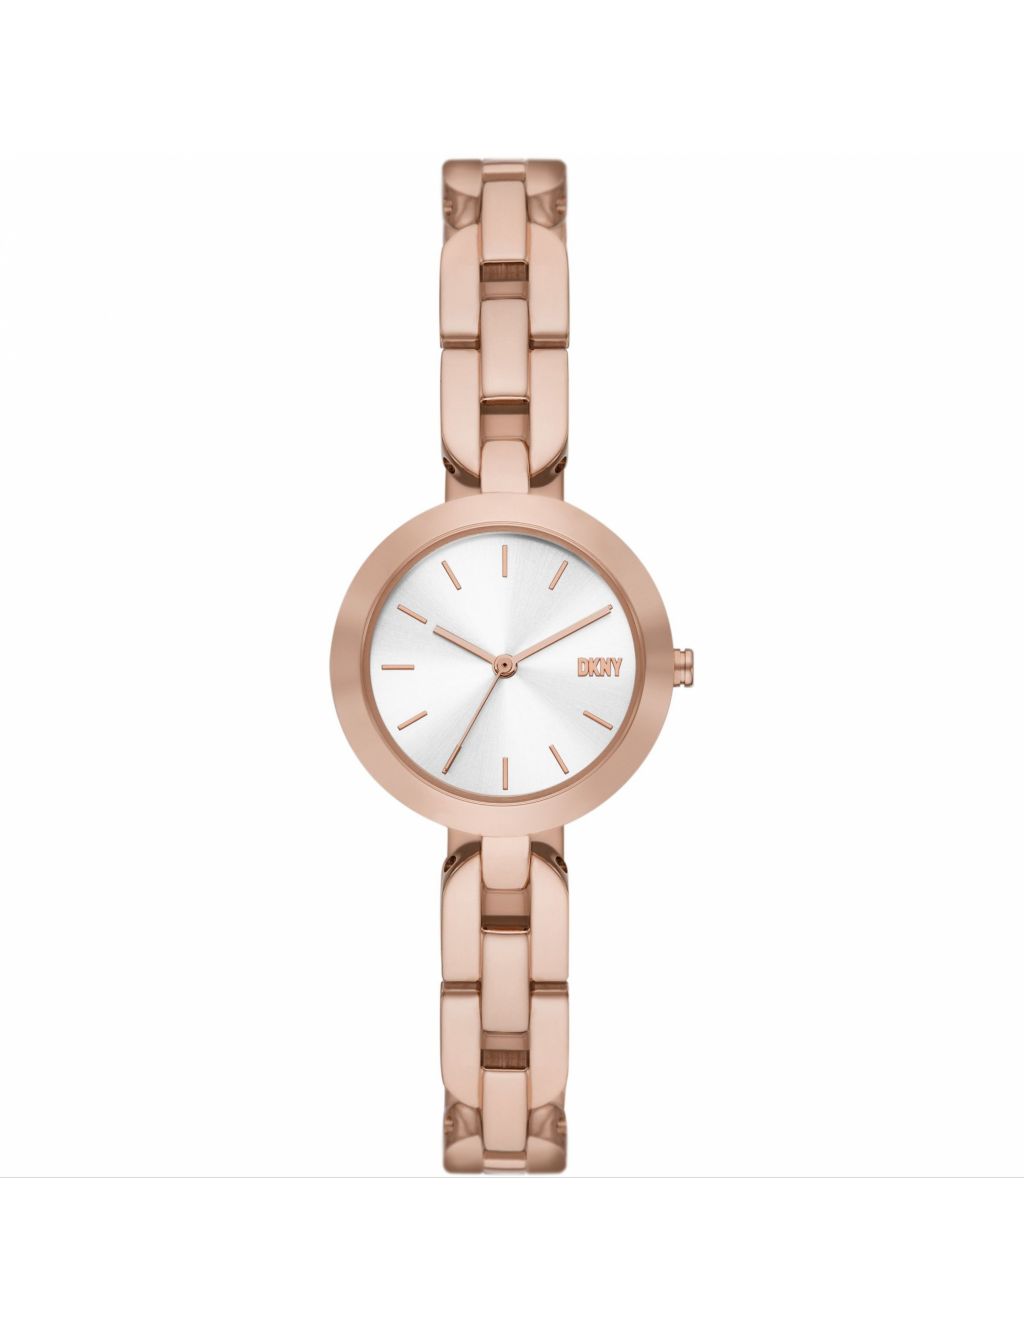 DKNY City Link Stainless Steel Watch image 1